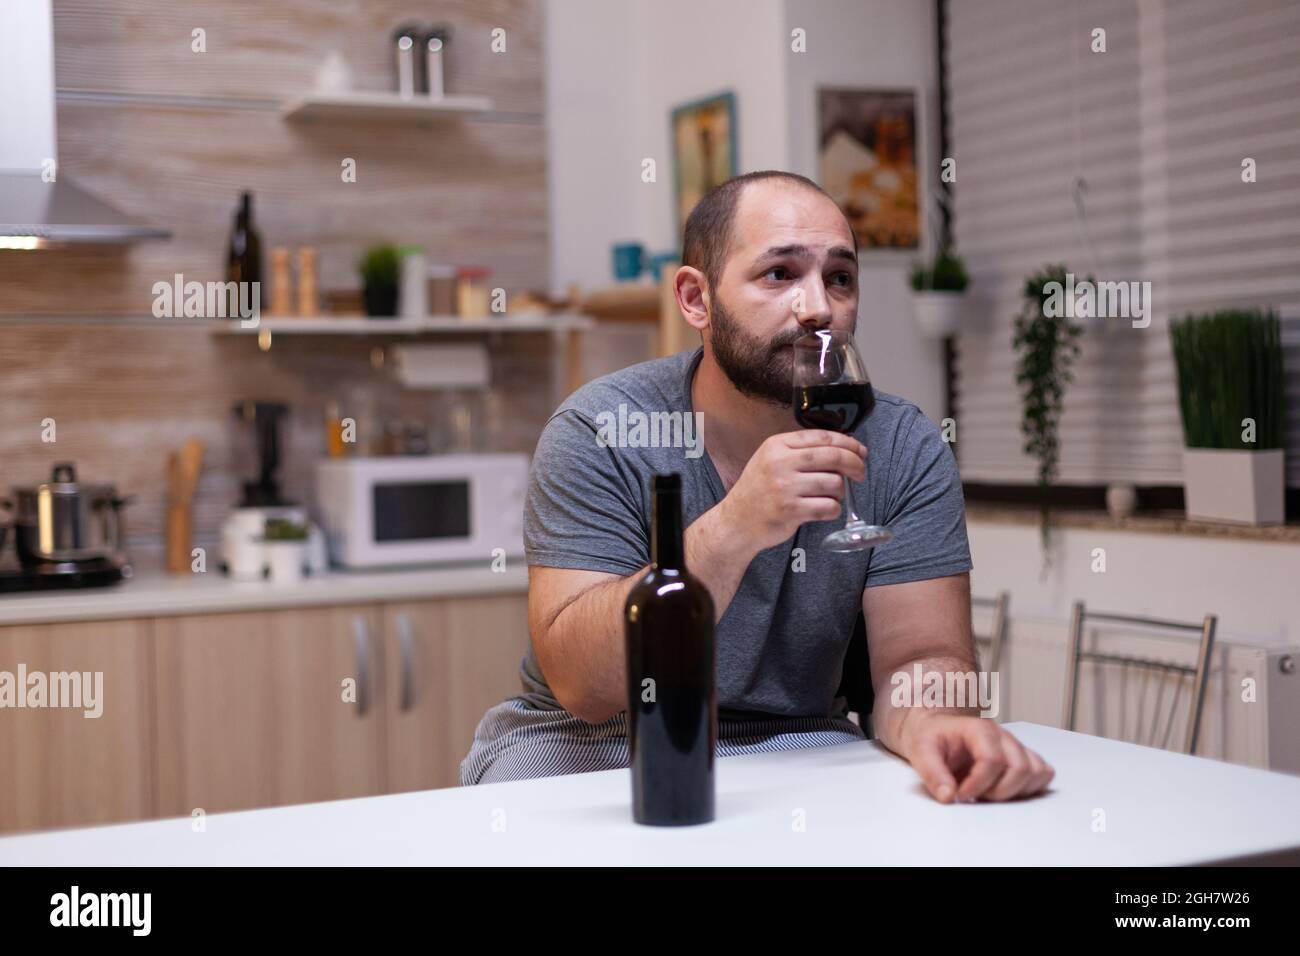 Caucasian man holding glass of wine sitting in kitchen at home. Depressed person drinking liquor, booze, alcoholic beverage alone while feeling intoxicated with bottle of alcohol Stock Photo